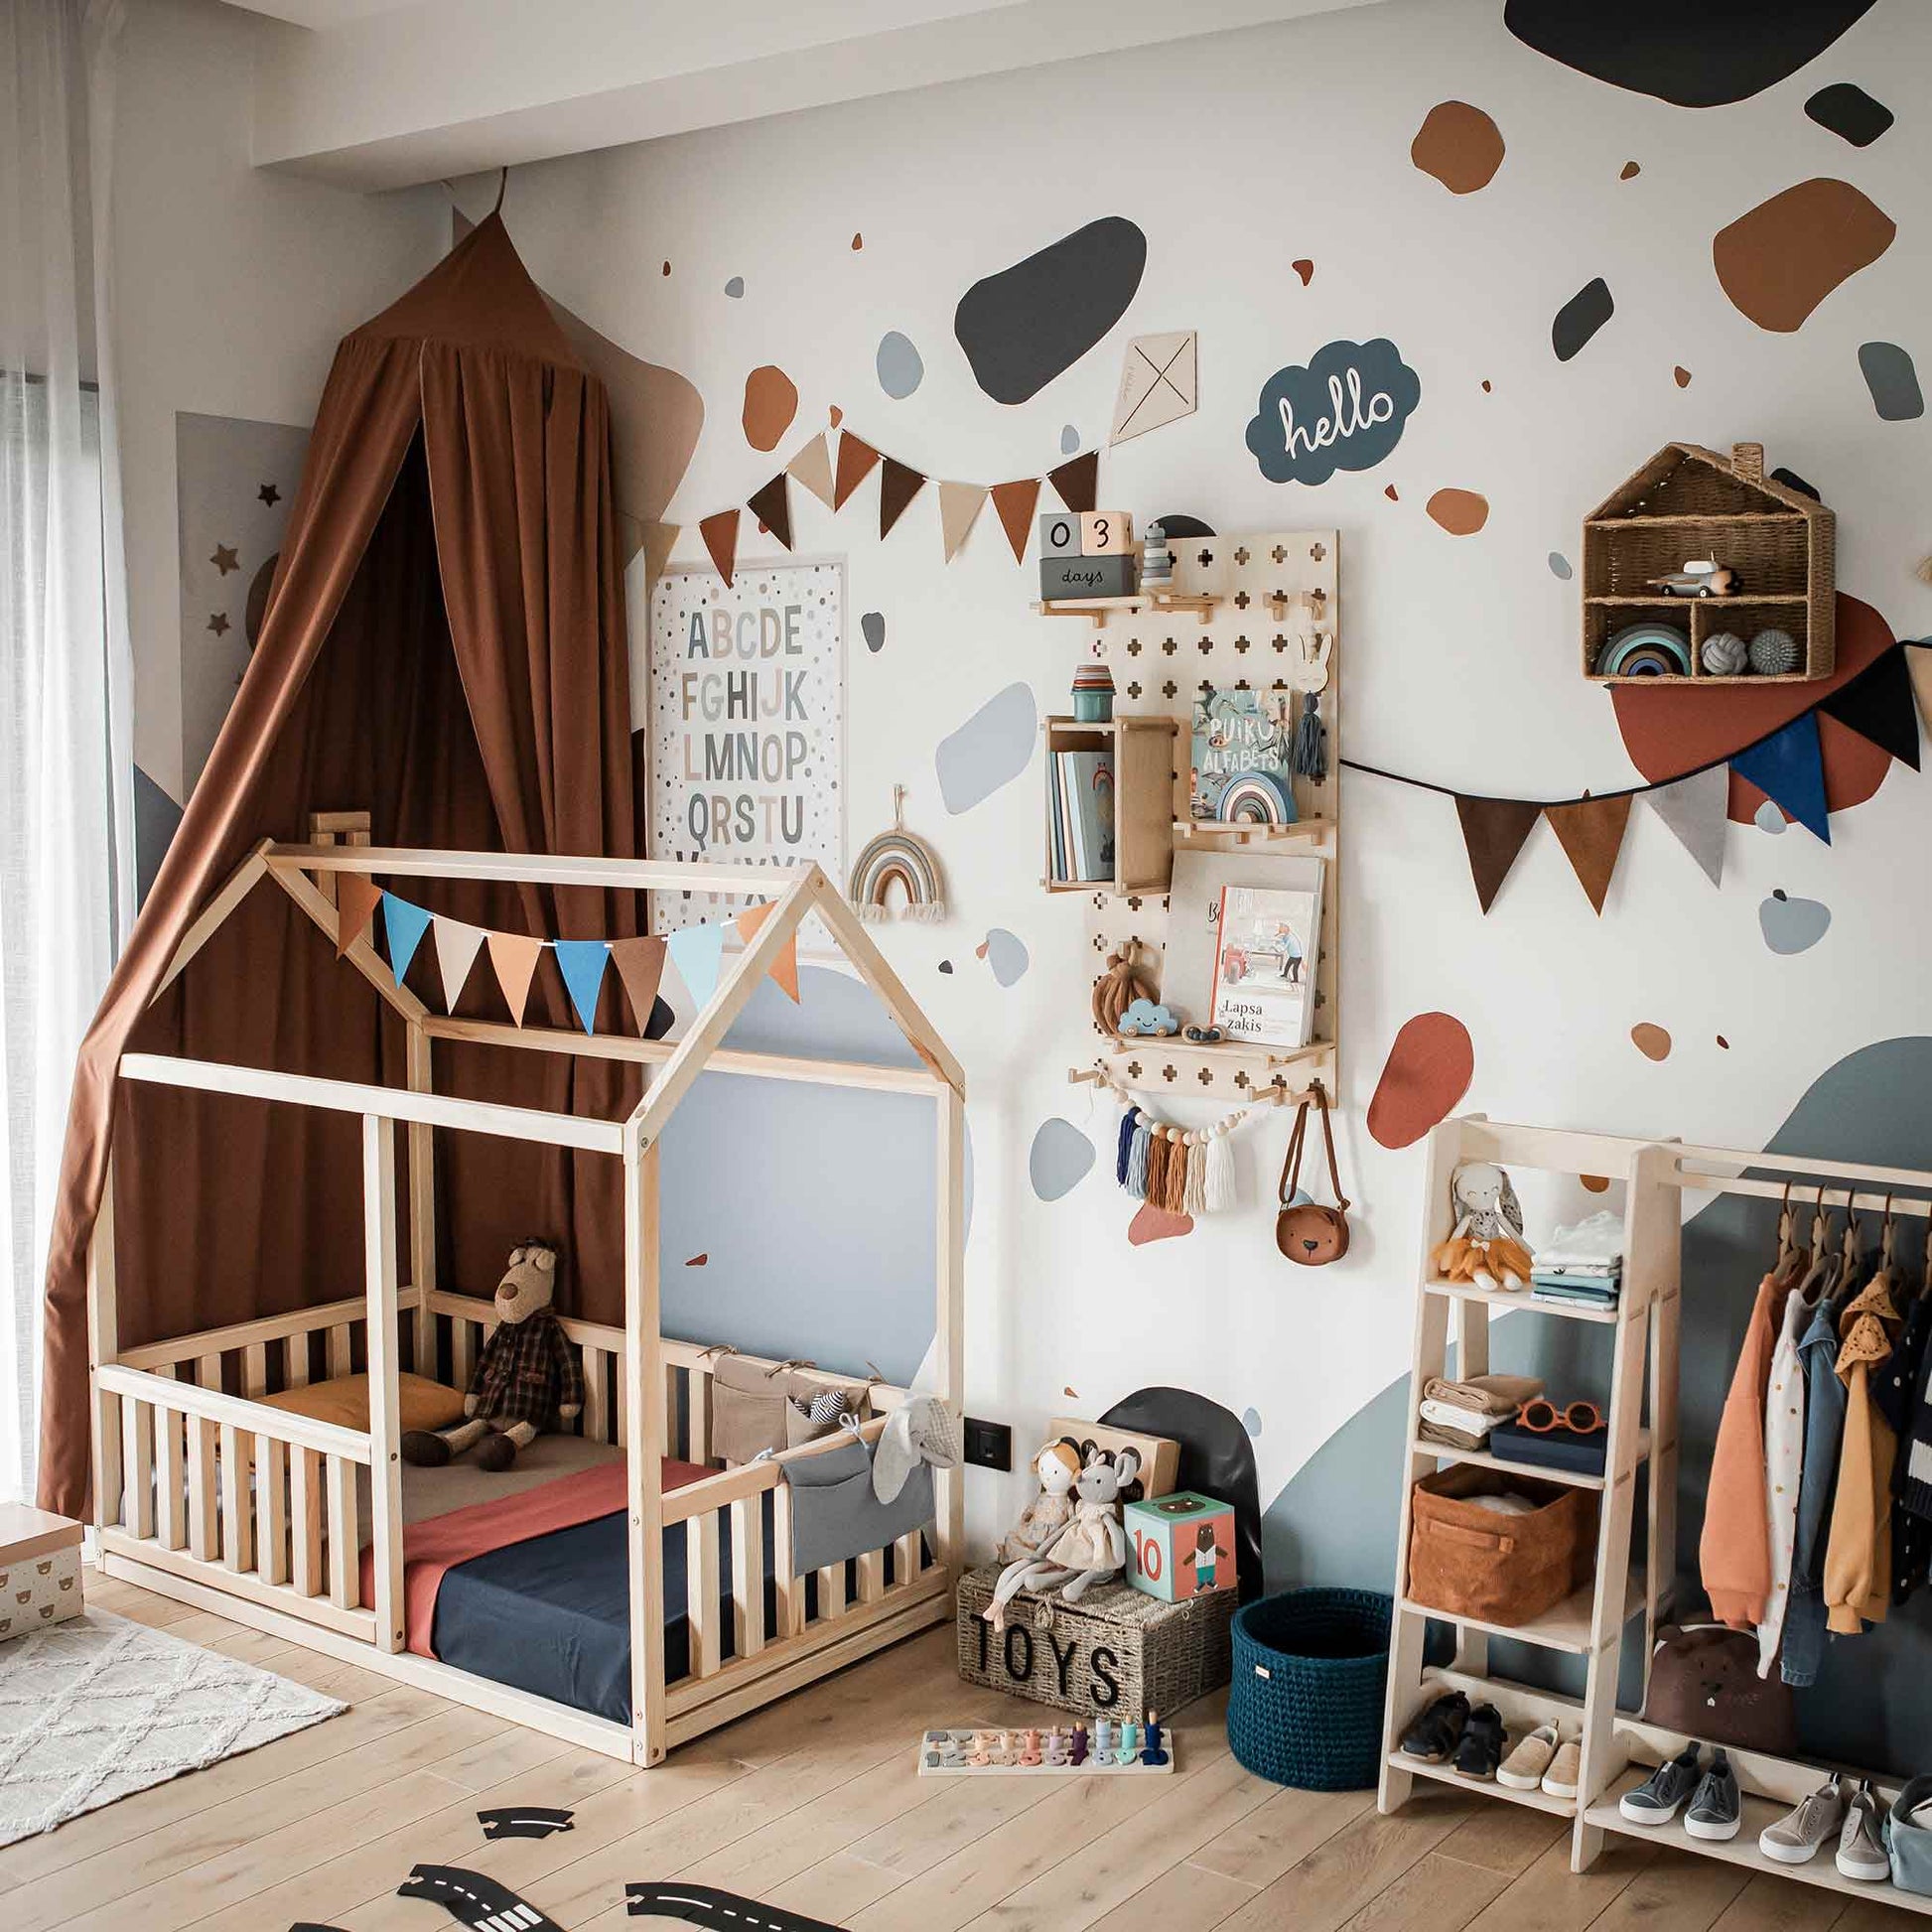 A well-organized children's bedroom features a Montessori floor house bed with rails, a wall-mounted alphabet chart, shelves filled with toys and decor, and neatly hung clothes. The walls are adorned with abstract patterns and colorful banners.